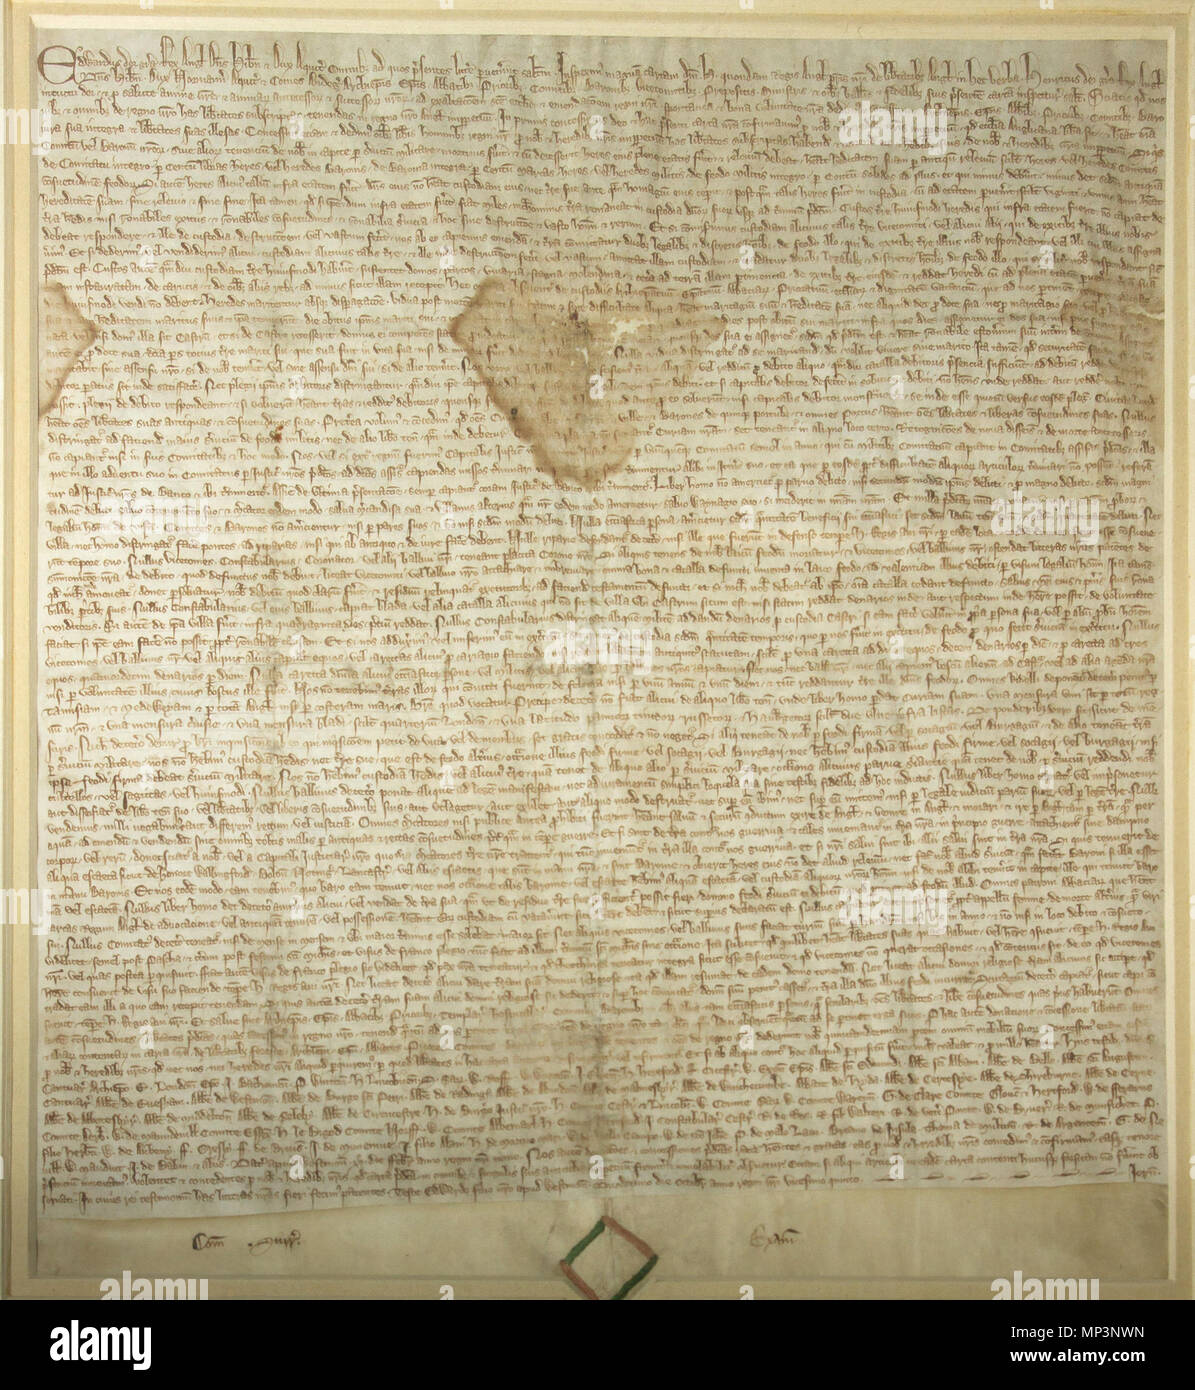 English: A 1297 copy of the Magna Carta which is on display in the Members'  Hall of Parliament House, Canberra, Australia. It was purchased by the  Government of Australia for £12,500